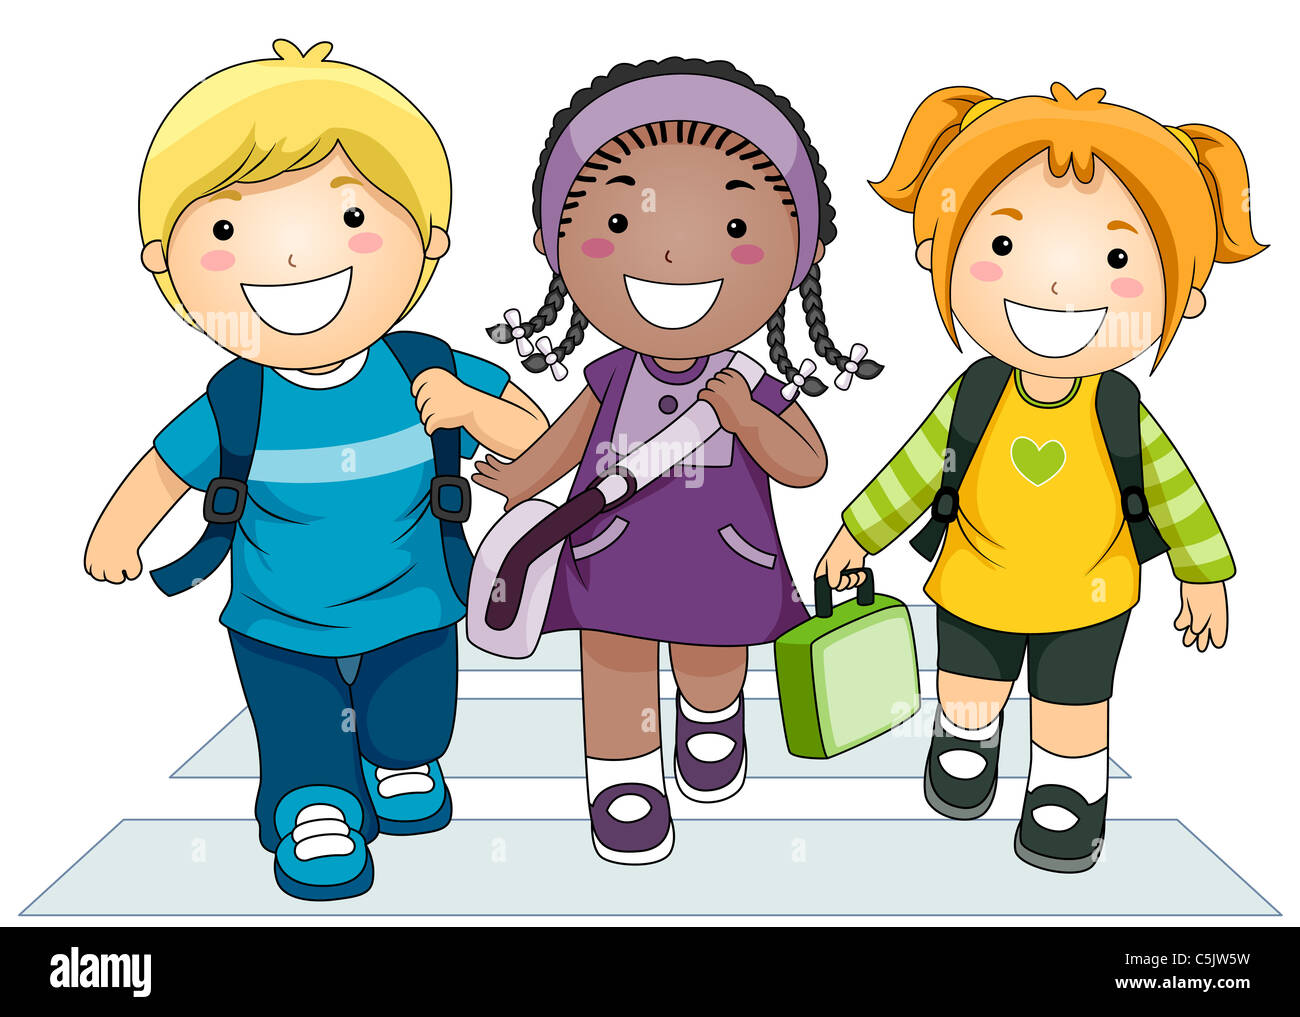 Illustration Featuring a Small Group of Kids Crossing the Street on their Way to School Stock Photo